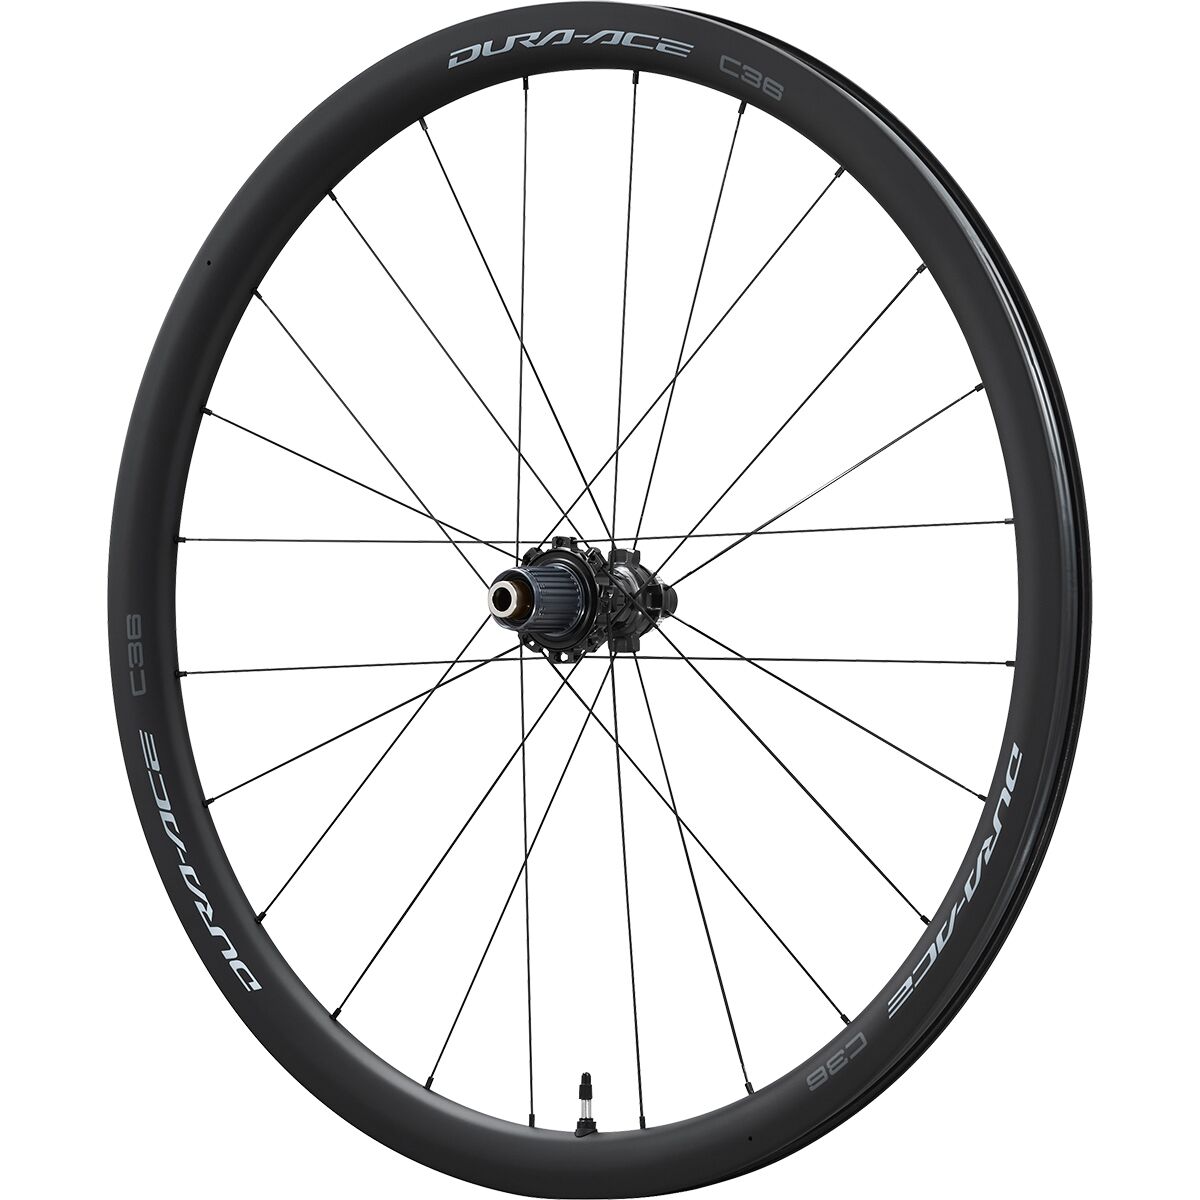 Shimano Dura-Ace WH-R9270 C36 Carbon Road Wheelset - Tubeless One Color, One Size -  EWHR9270C36LFEREDX